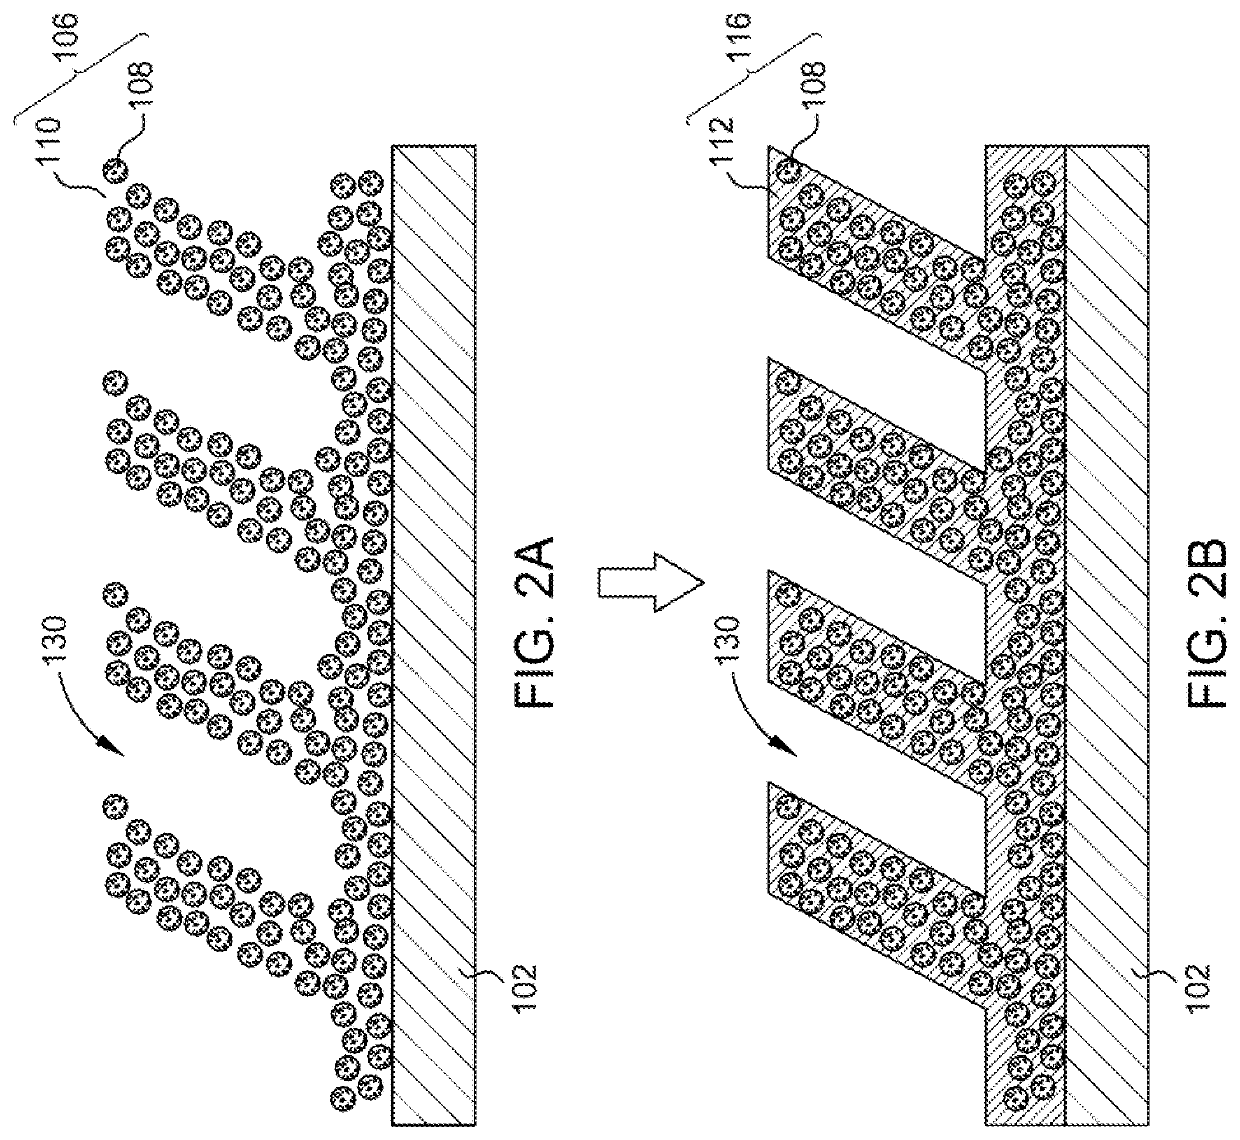 Methods for increasing the density of high-index nanoimprint lithography films